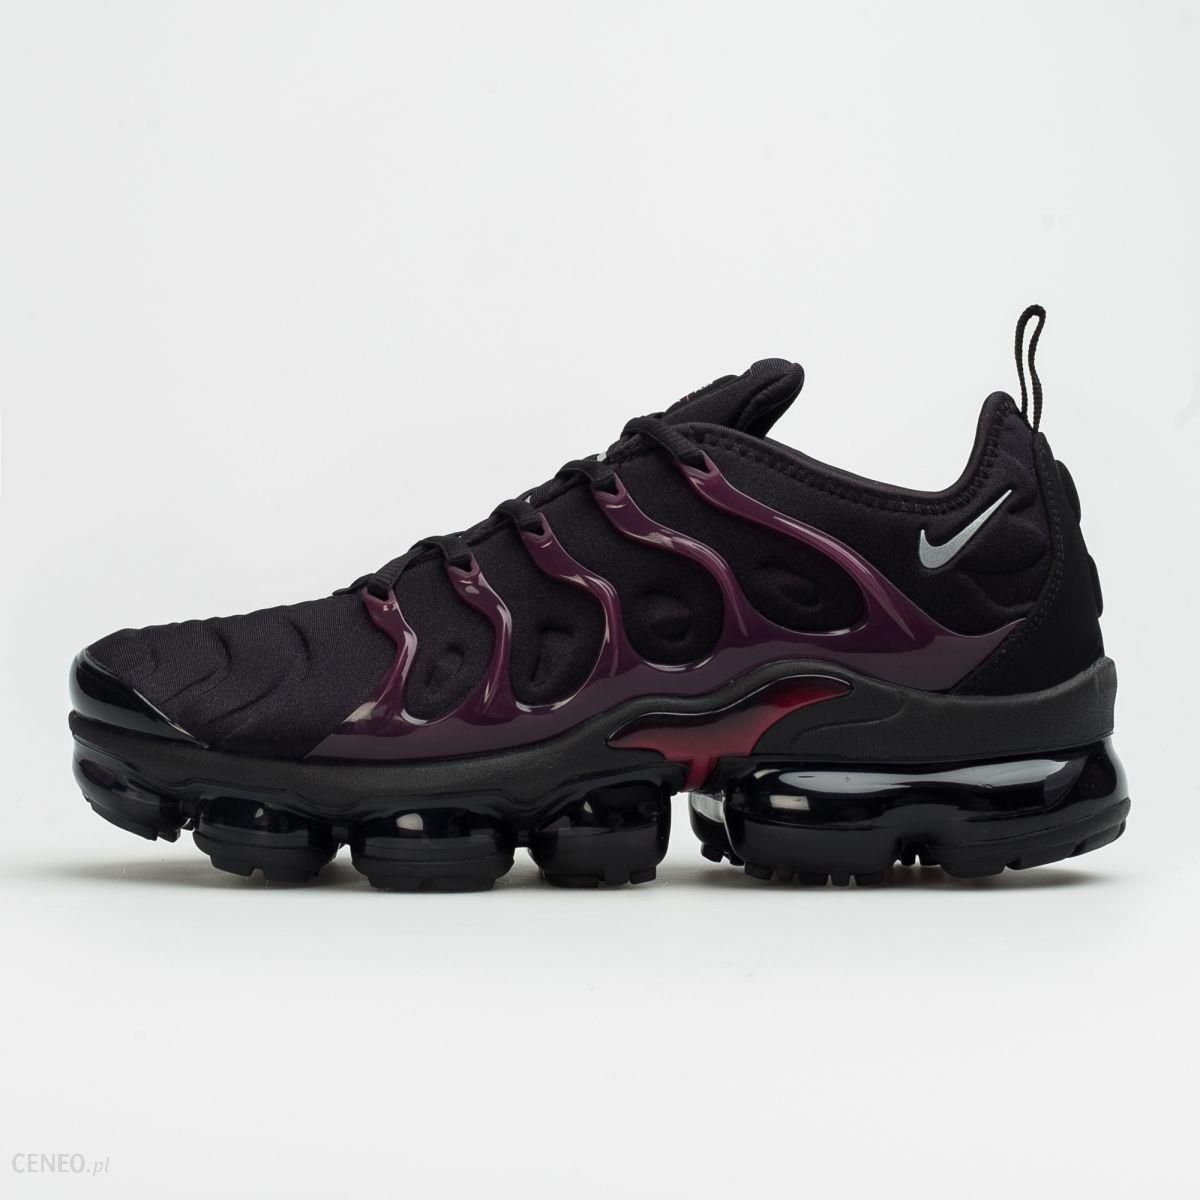 Shoes and Shoes Nike vapormax plus original 11.04.2020 ID